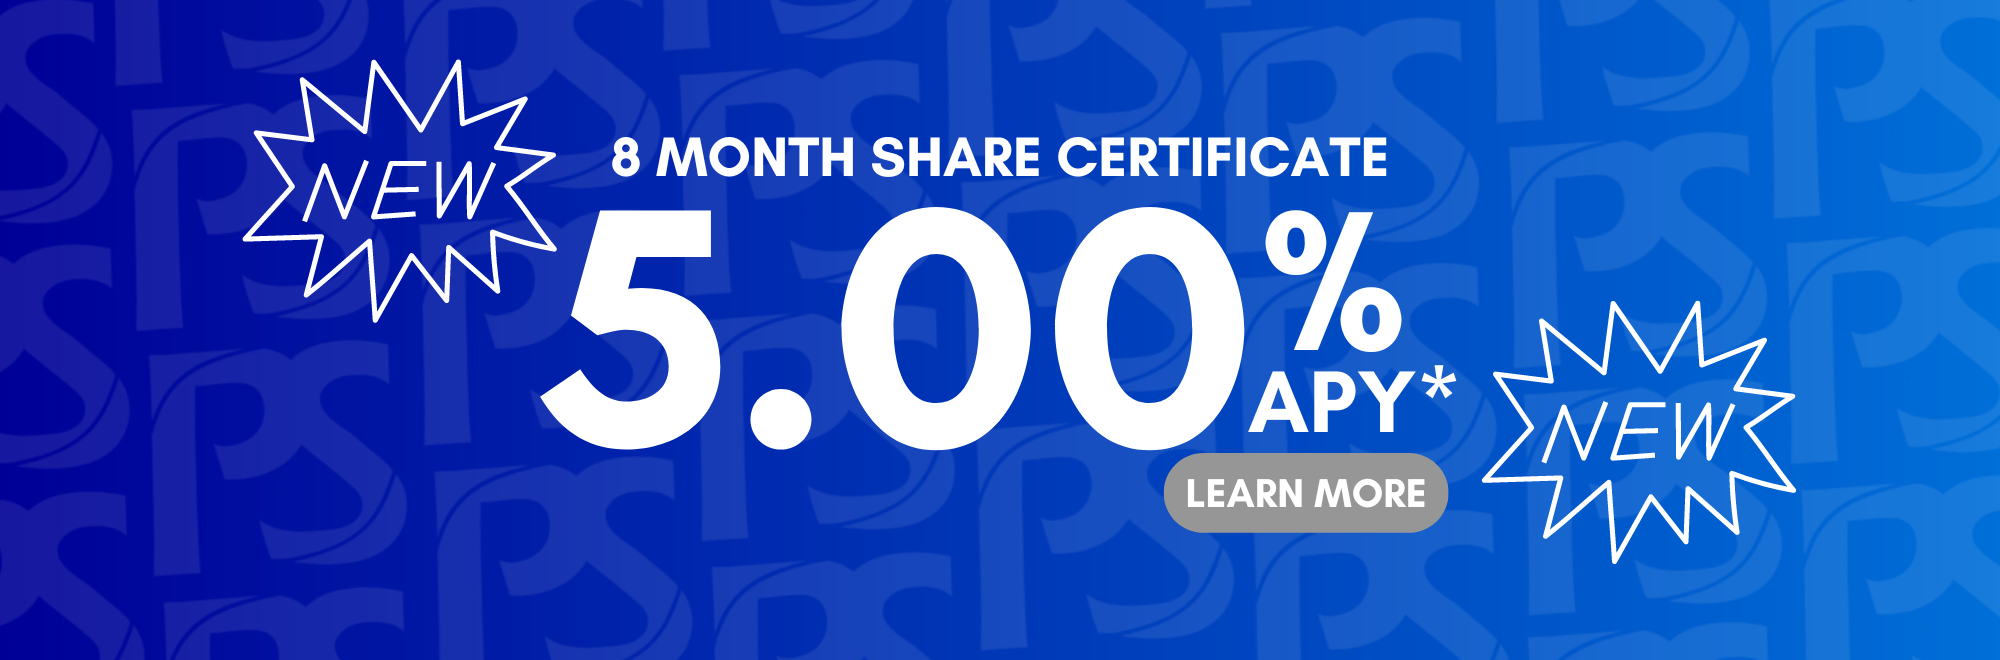 8 month share certificate 5.00%APY* click to learn more